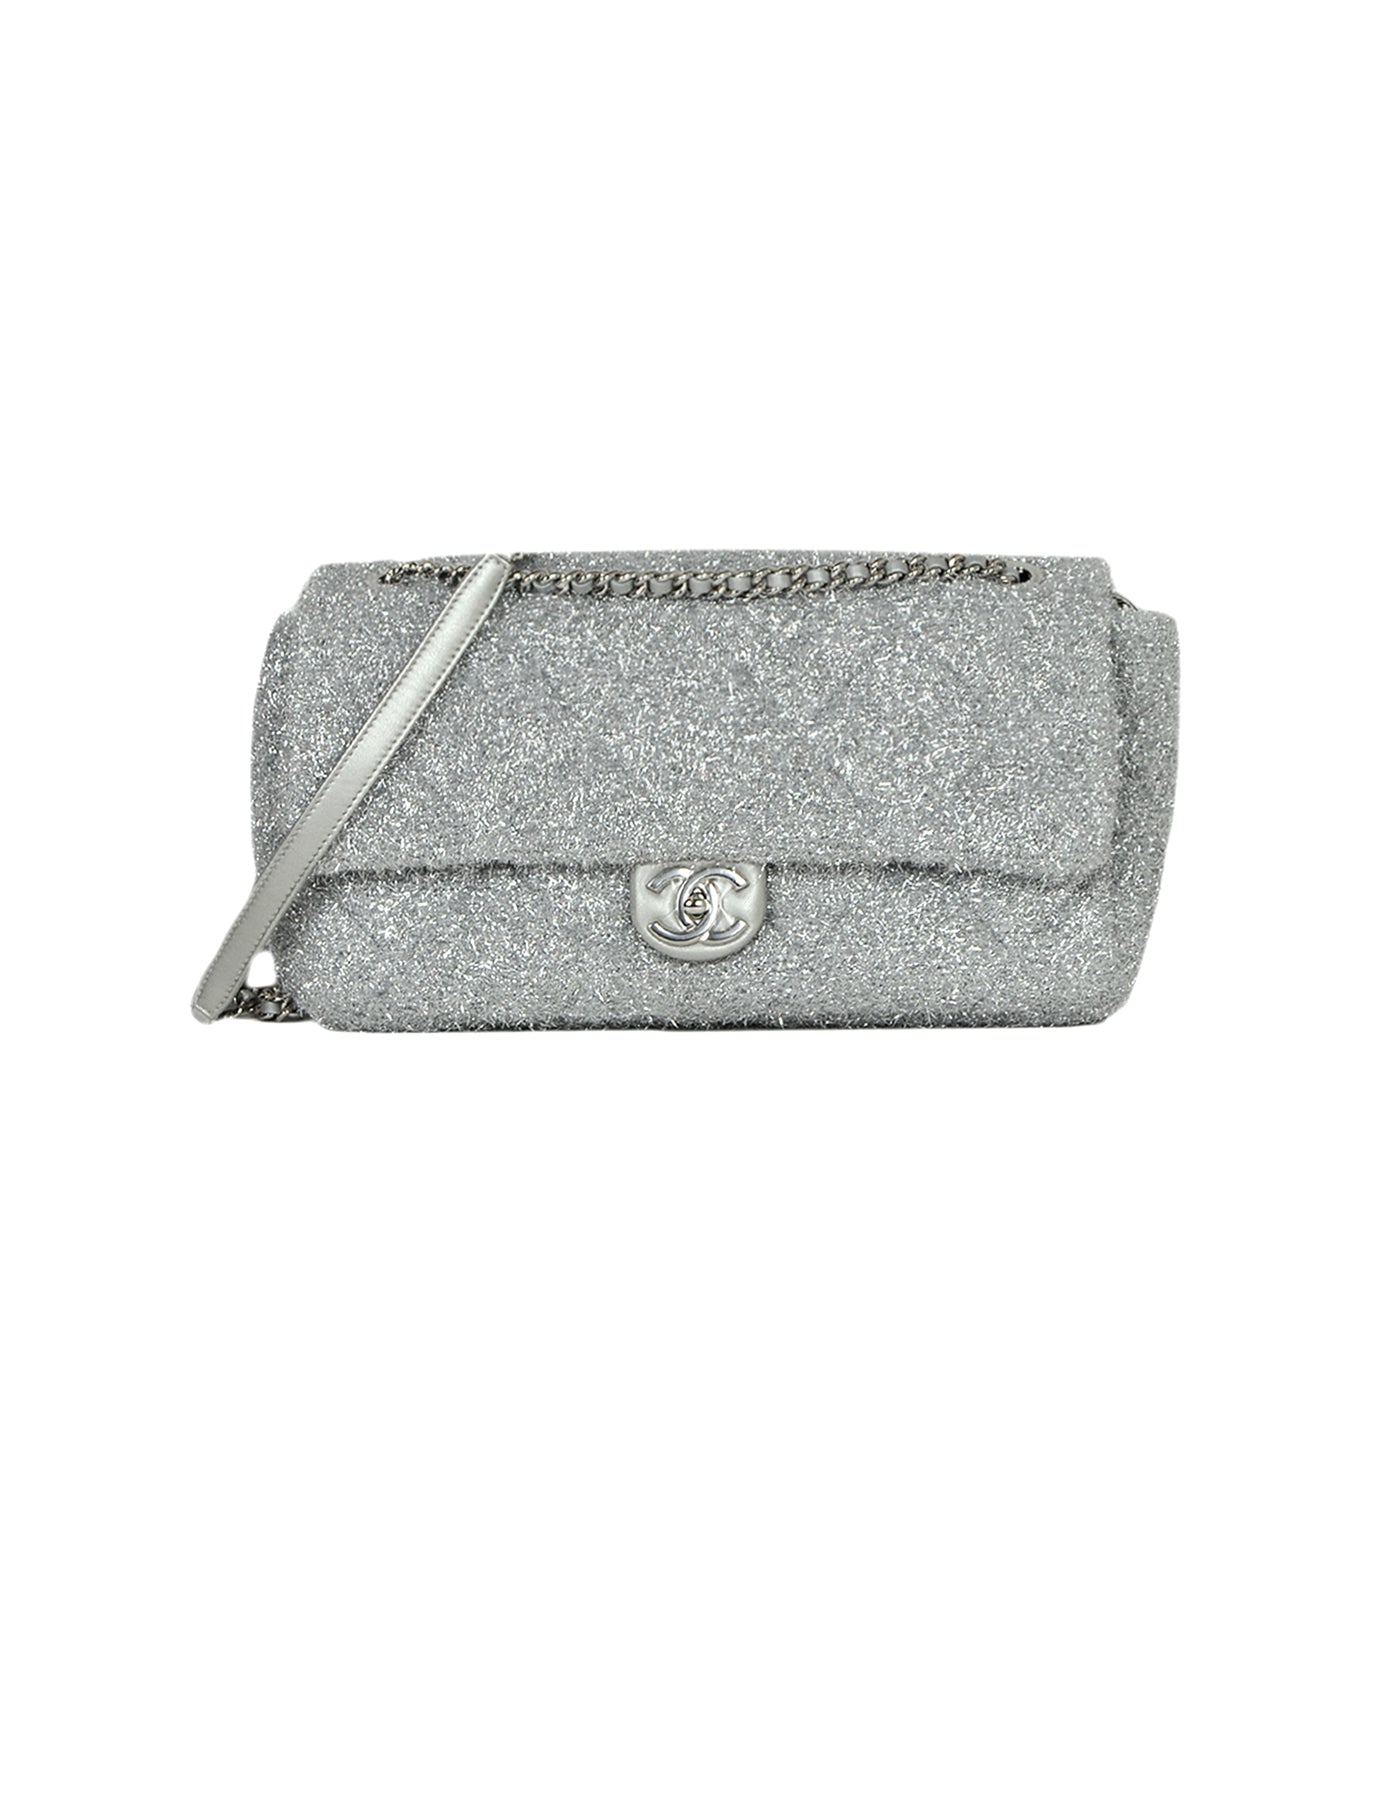 Chanel Silver Quilted Knit Pluto Glitter Large Flap Bag